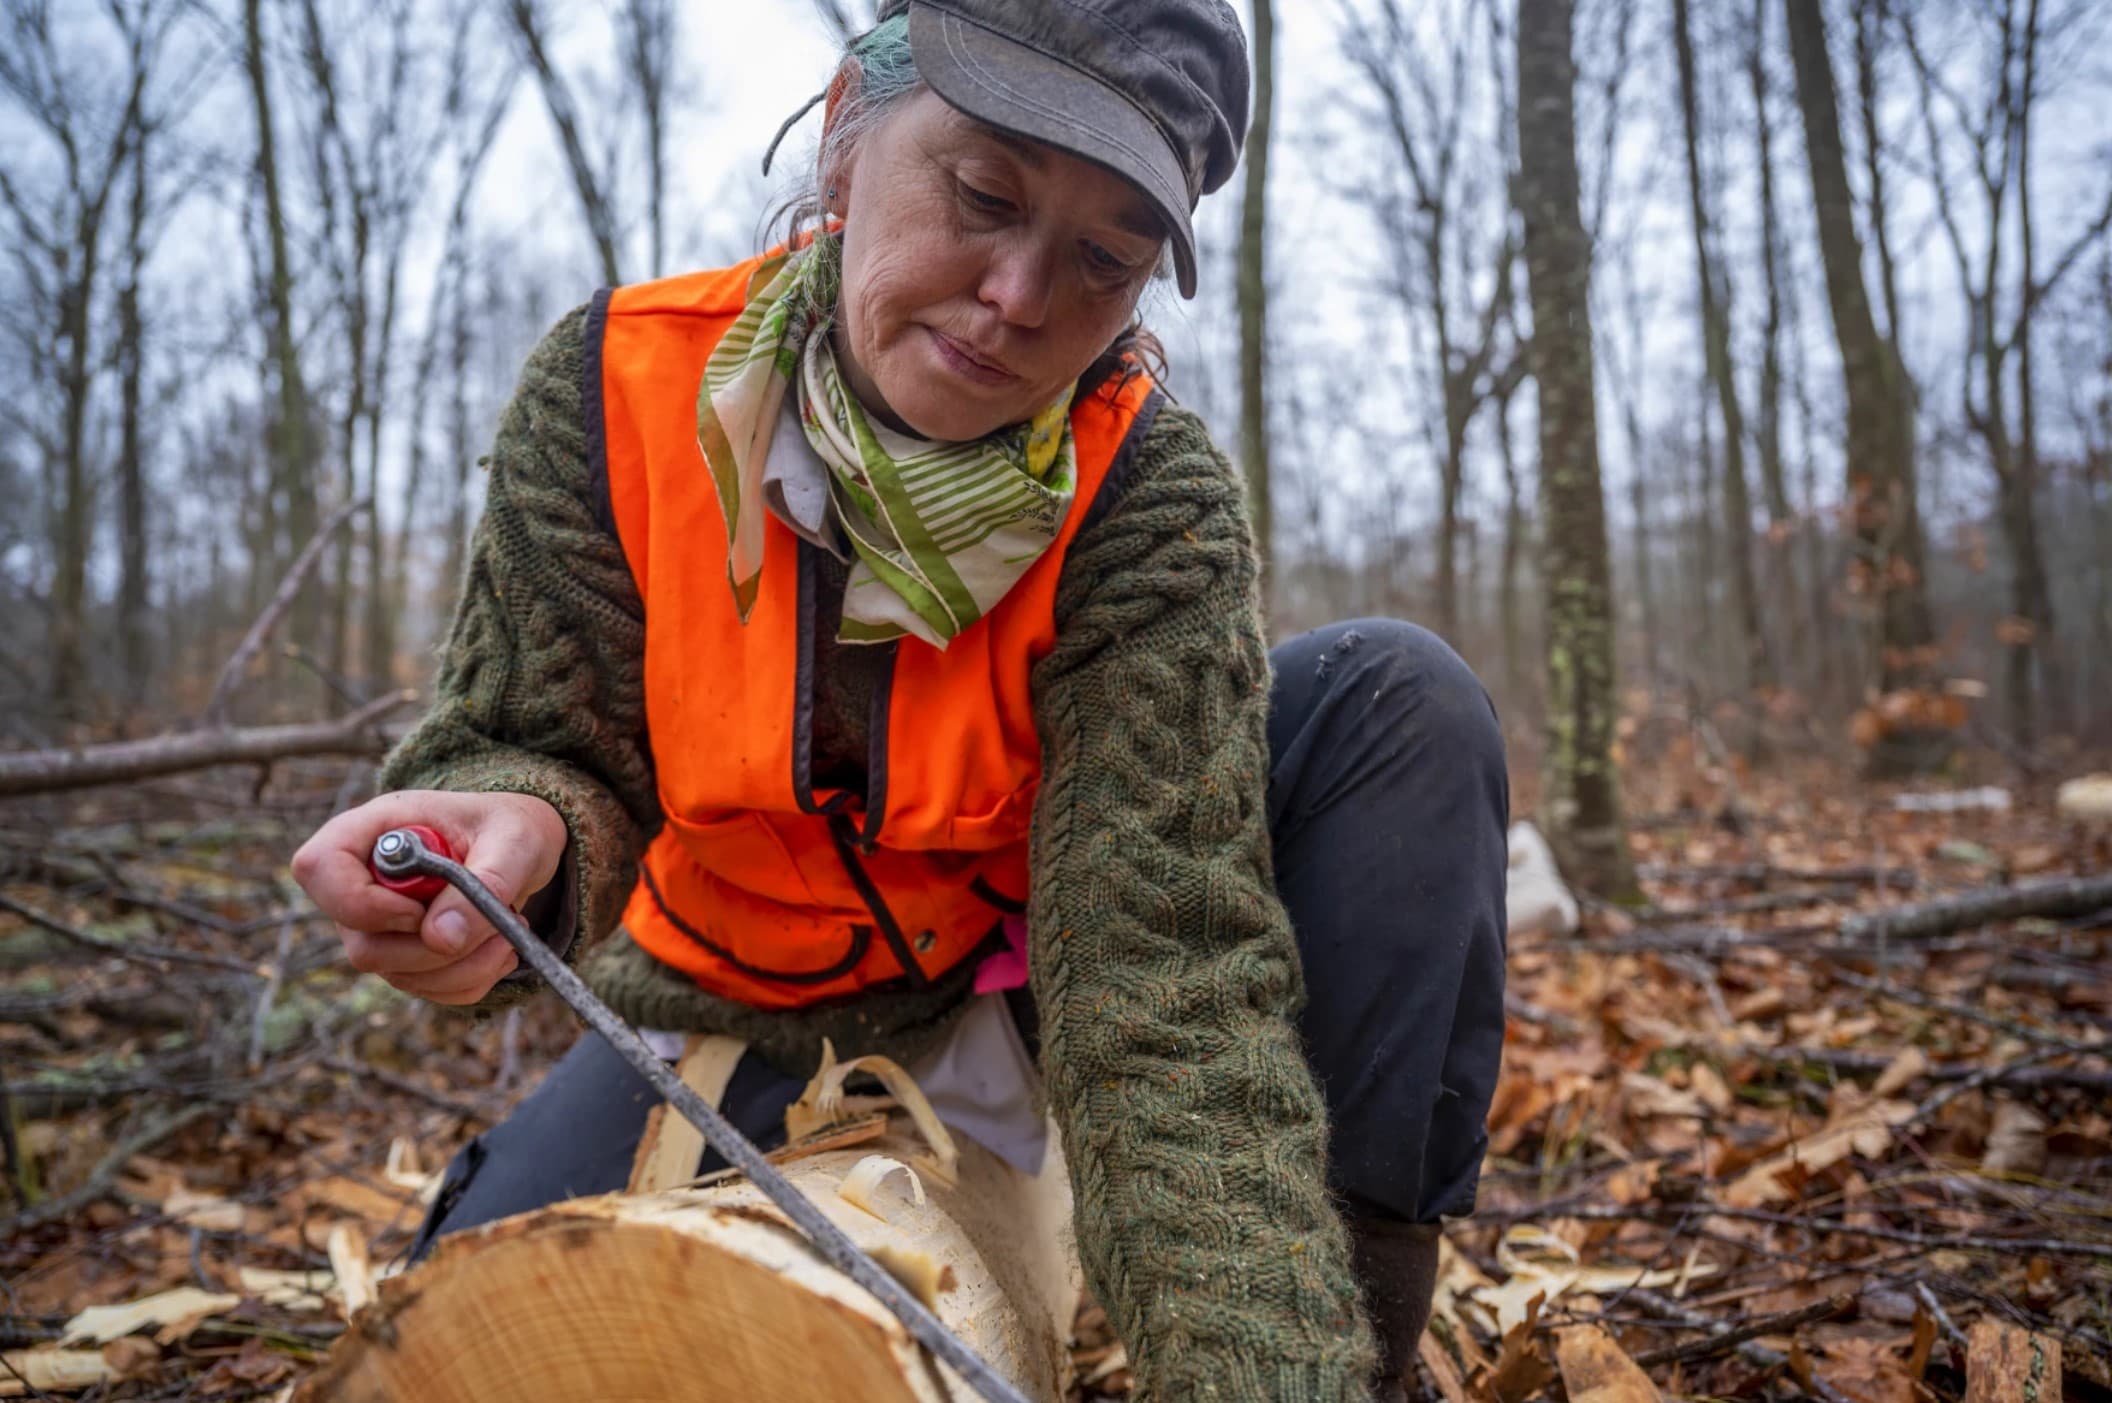 Claire Rutledge, of the Connecticut Agricultural Experiment Station, cuts away bark from a section of ash tree in search of more EAB larvae. This entire tree, already killed by the infestation, was cut and inspected to create a model of the EAB population in the area. (Tyler Russell/Connecticut Public)